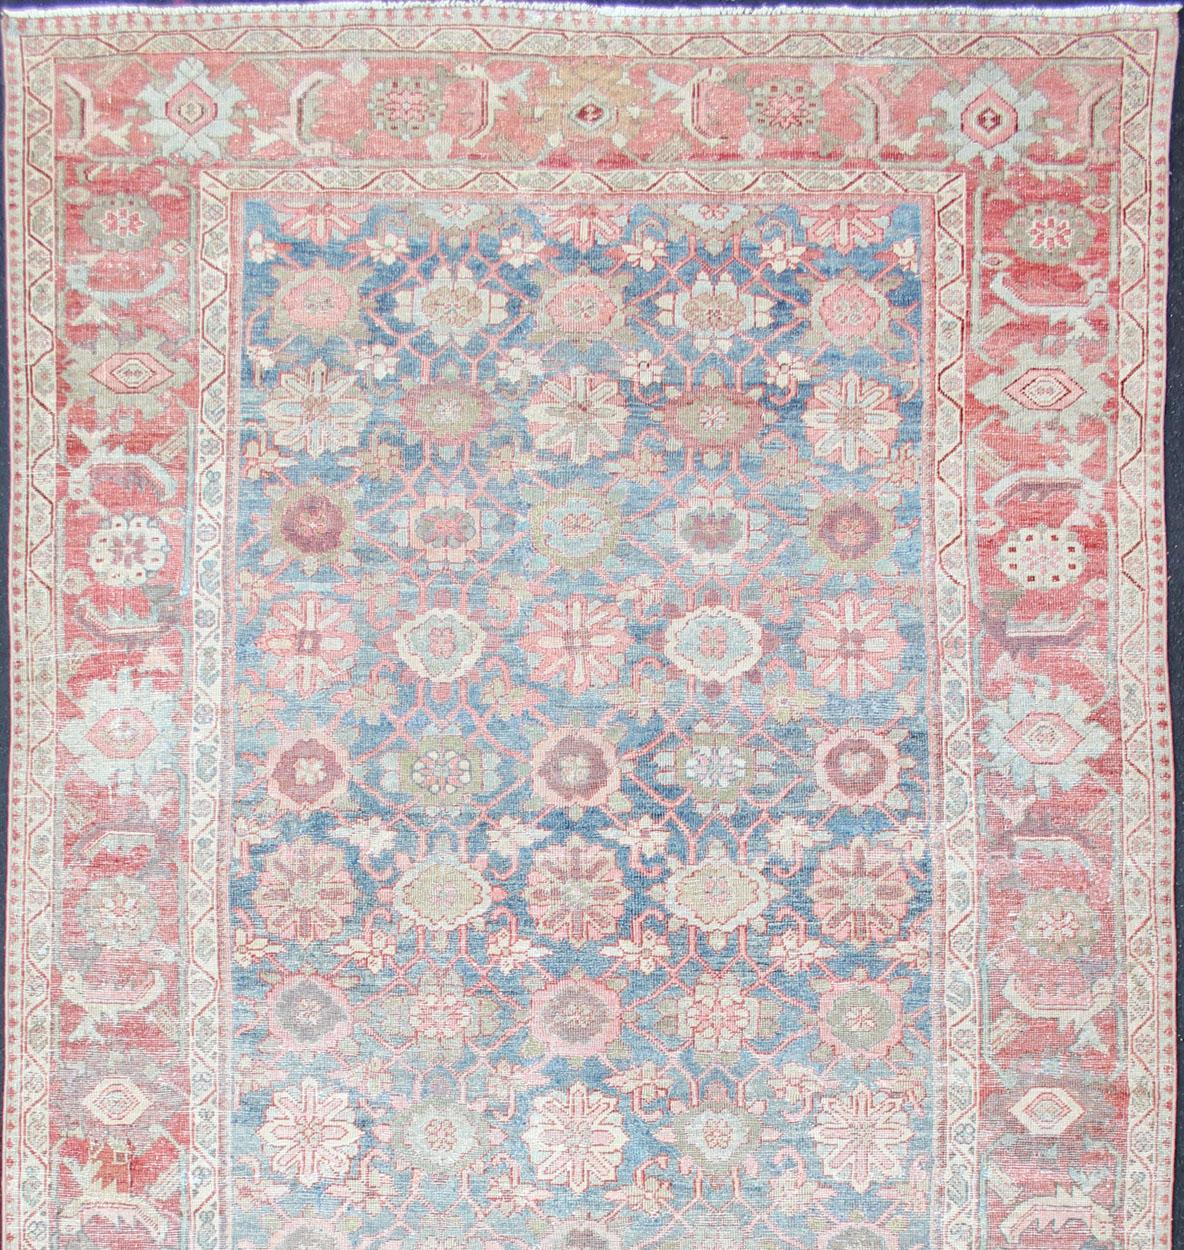 Persian Mahal antique rug with floral design in blue, and red colors with all-over design, rug R20-66, country of origin / type: Iran / Mahal, circa 1900.

This antique Persian Mahal rug, circa early 20th century, relies heavily on exquisite